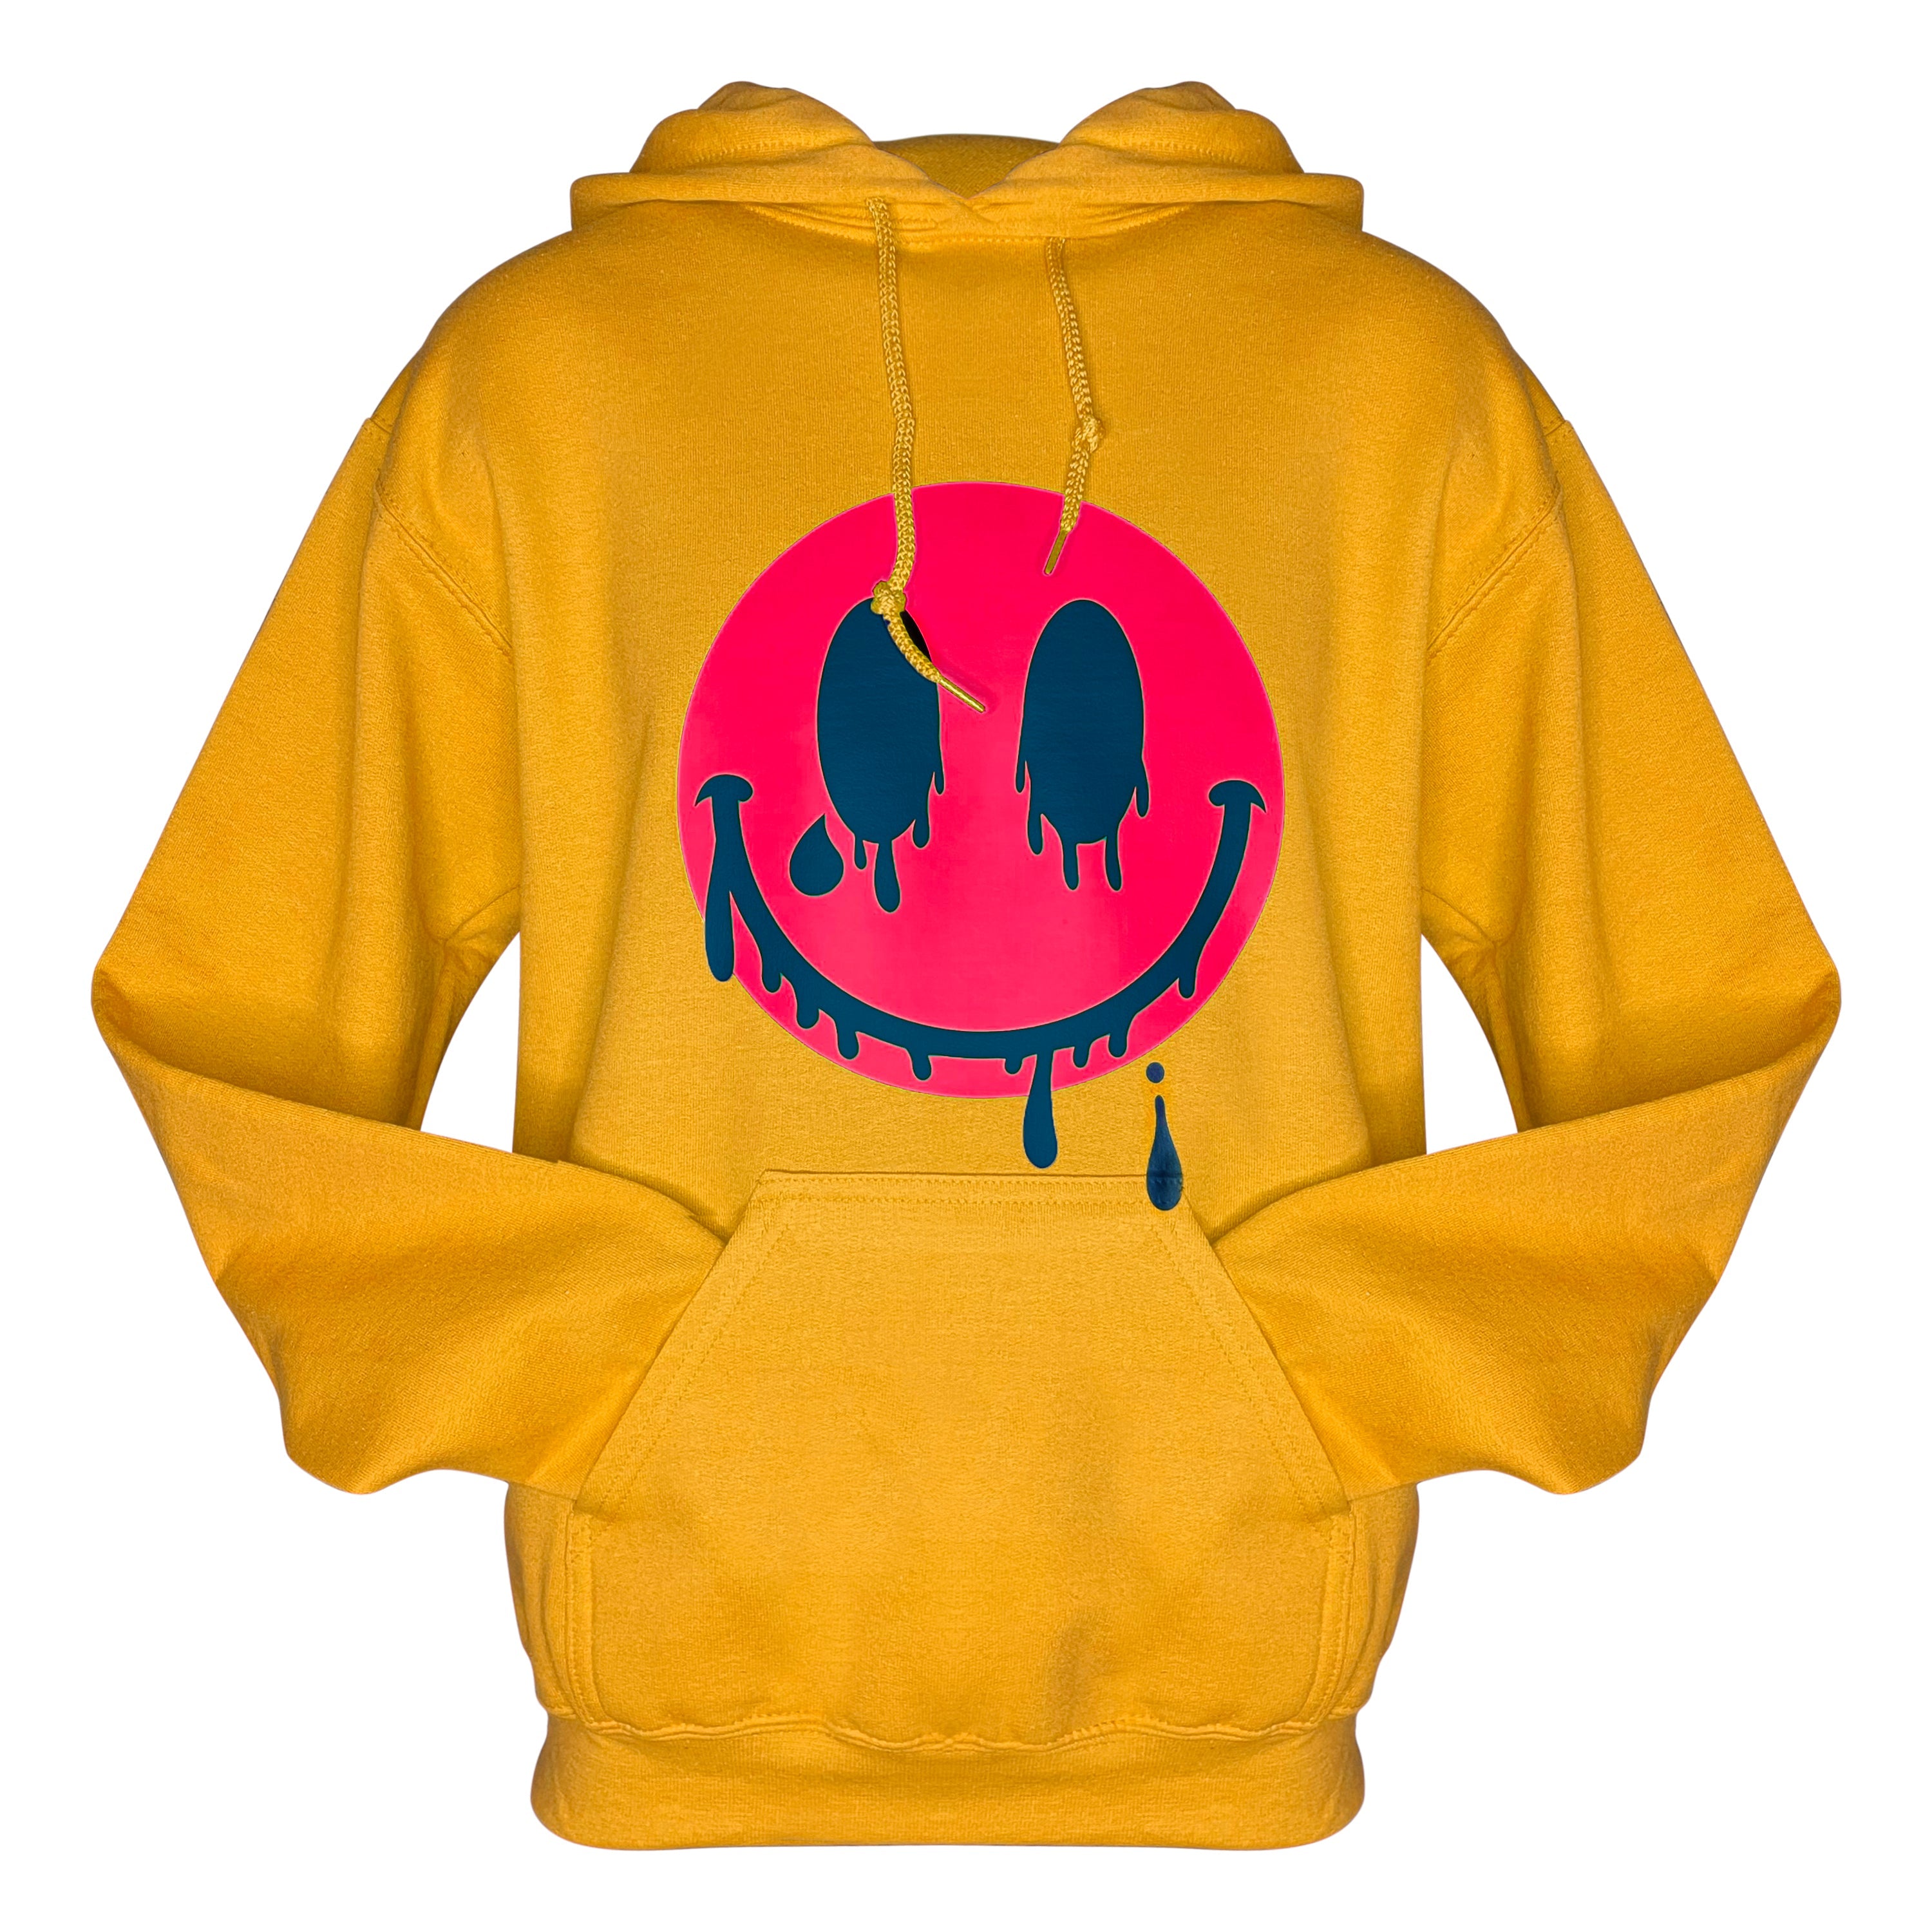 2023 Smiles Series: Pink/Blue Melting Smiley Face Unisex 